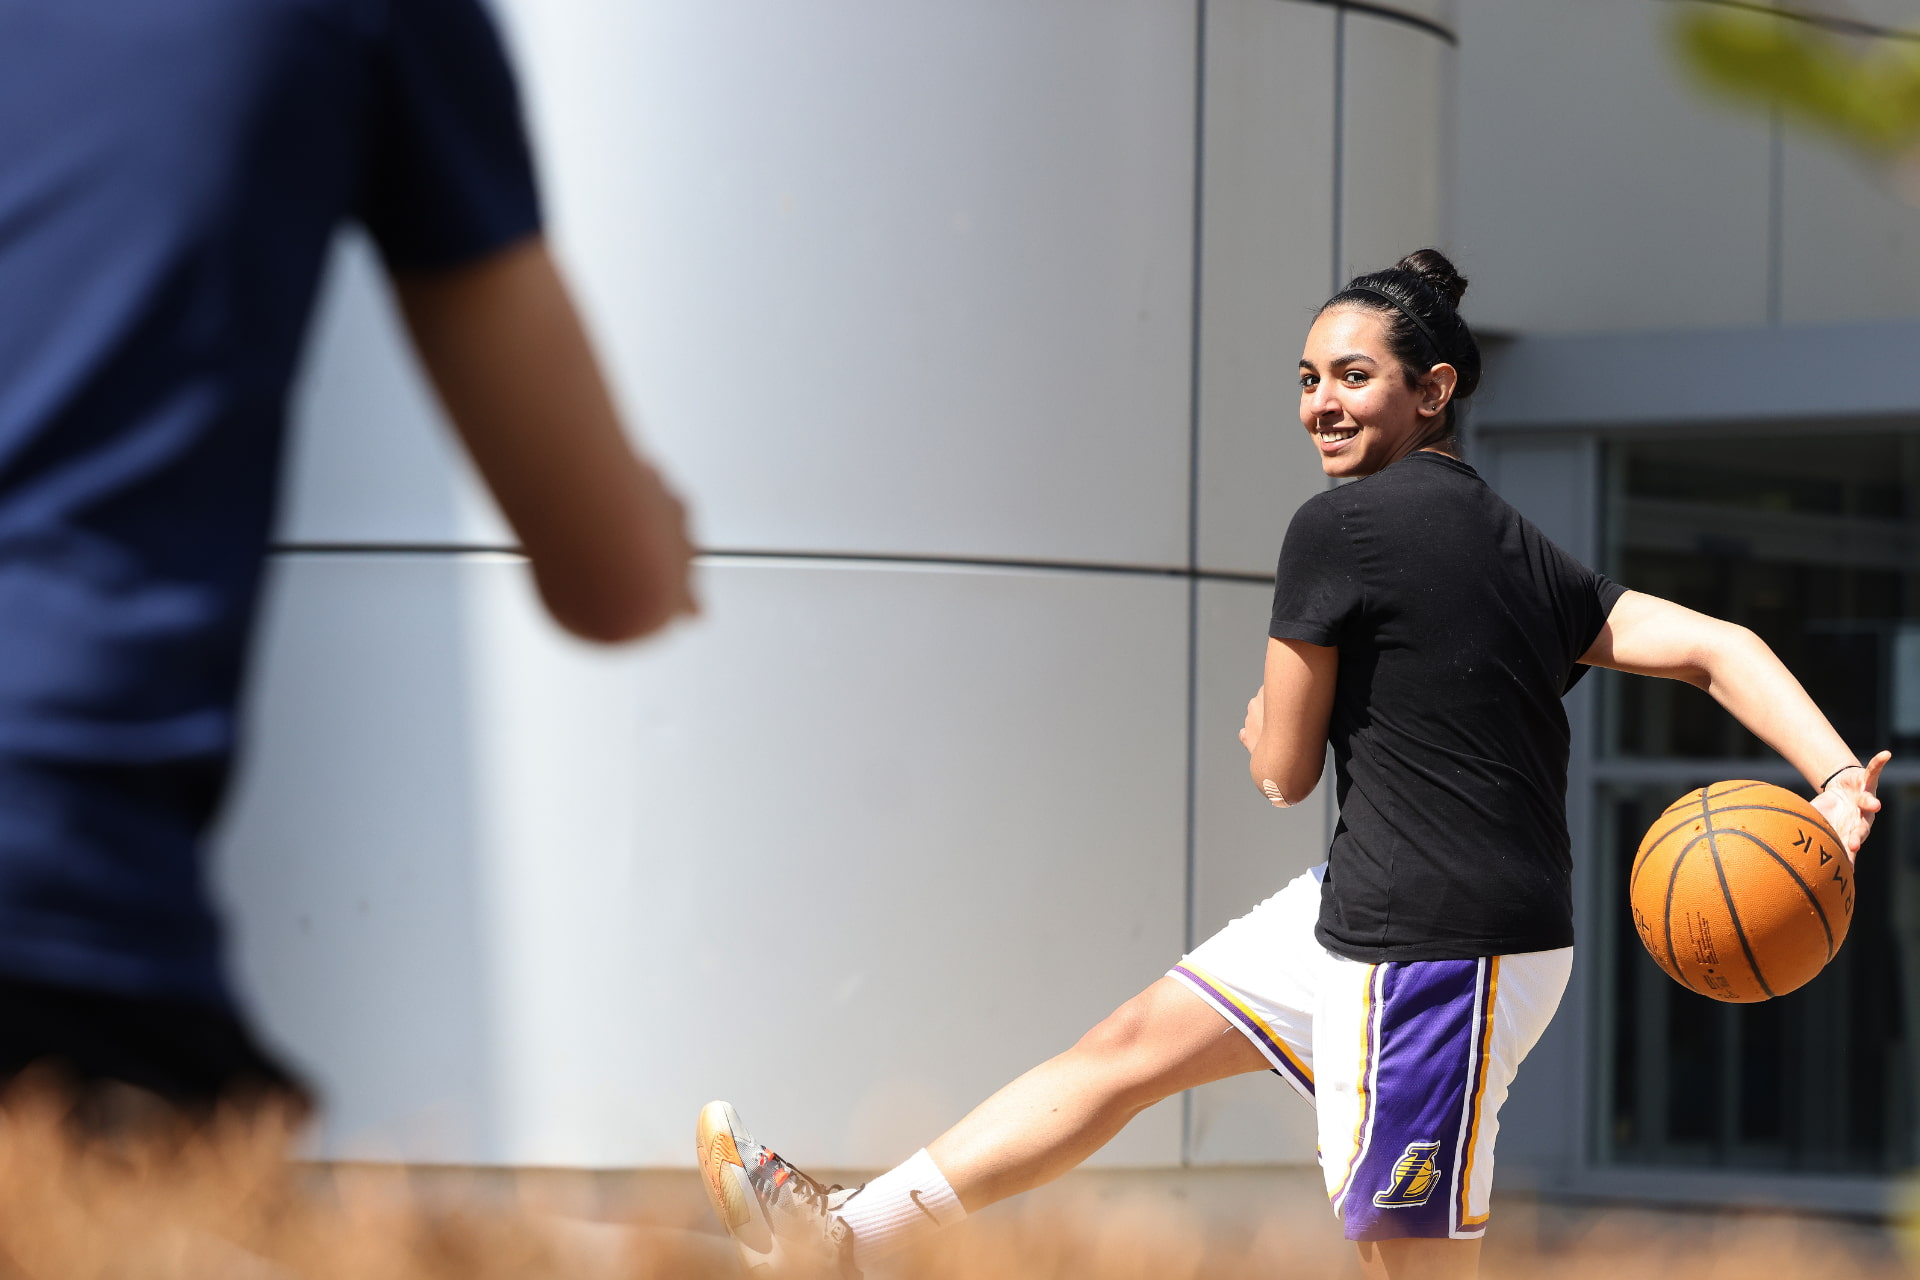 A woman playing with a basketball.